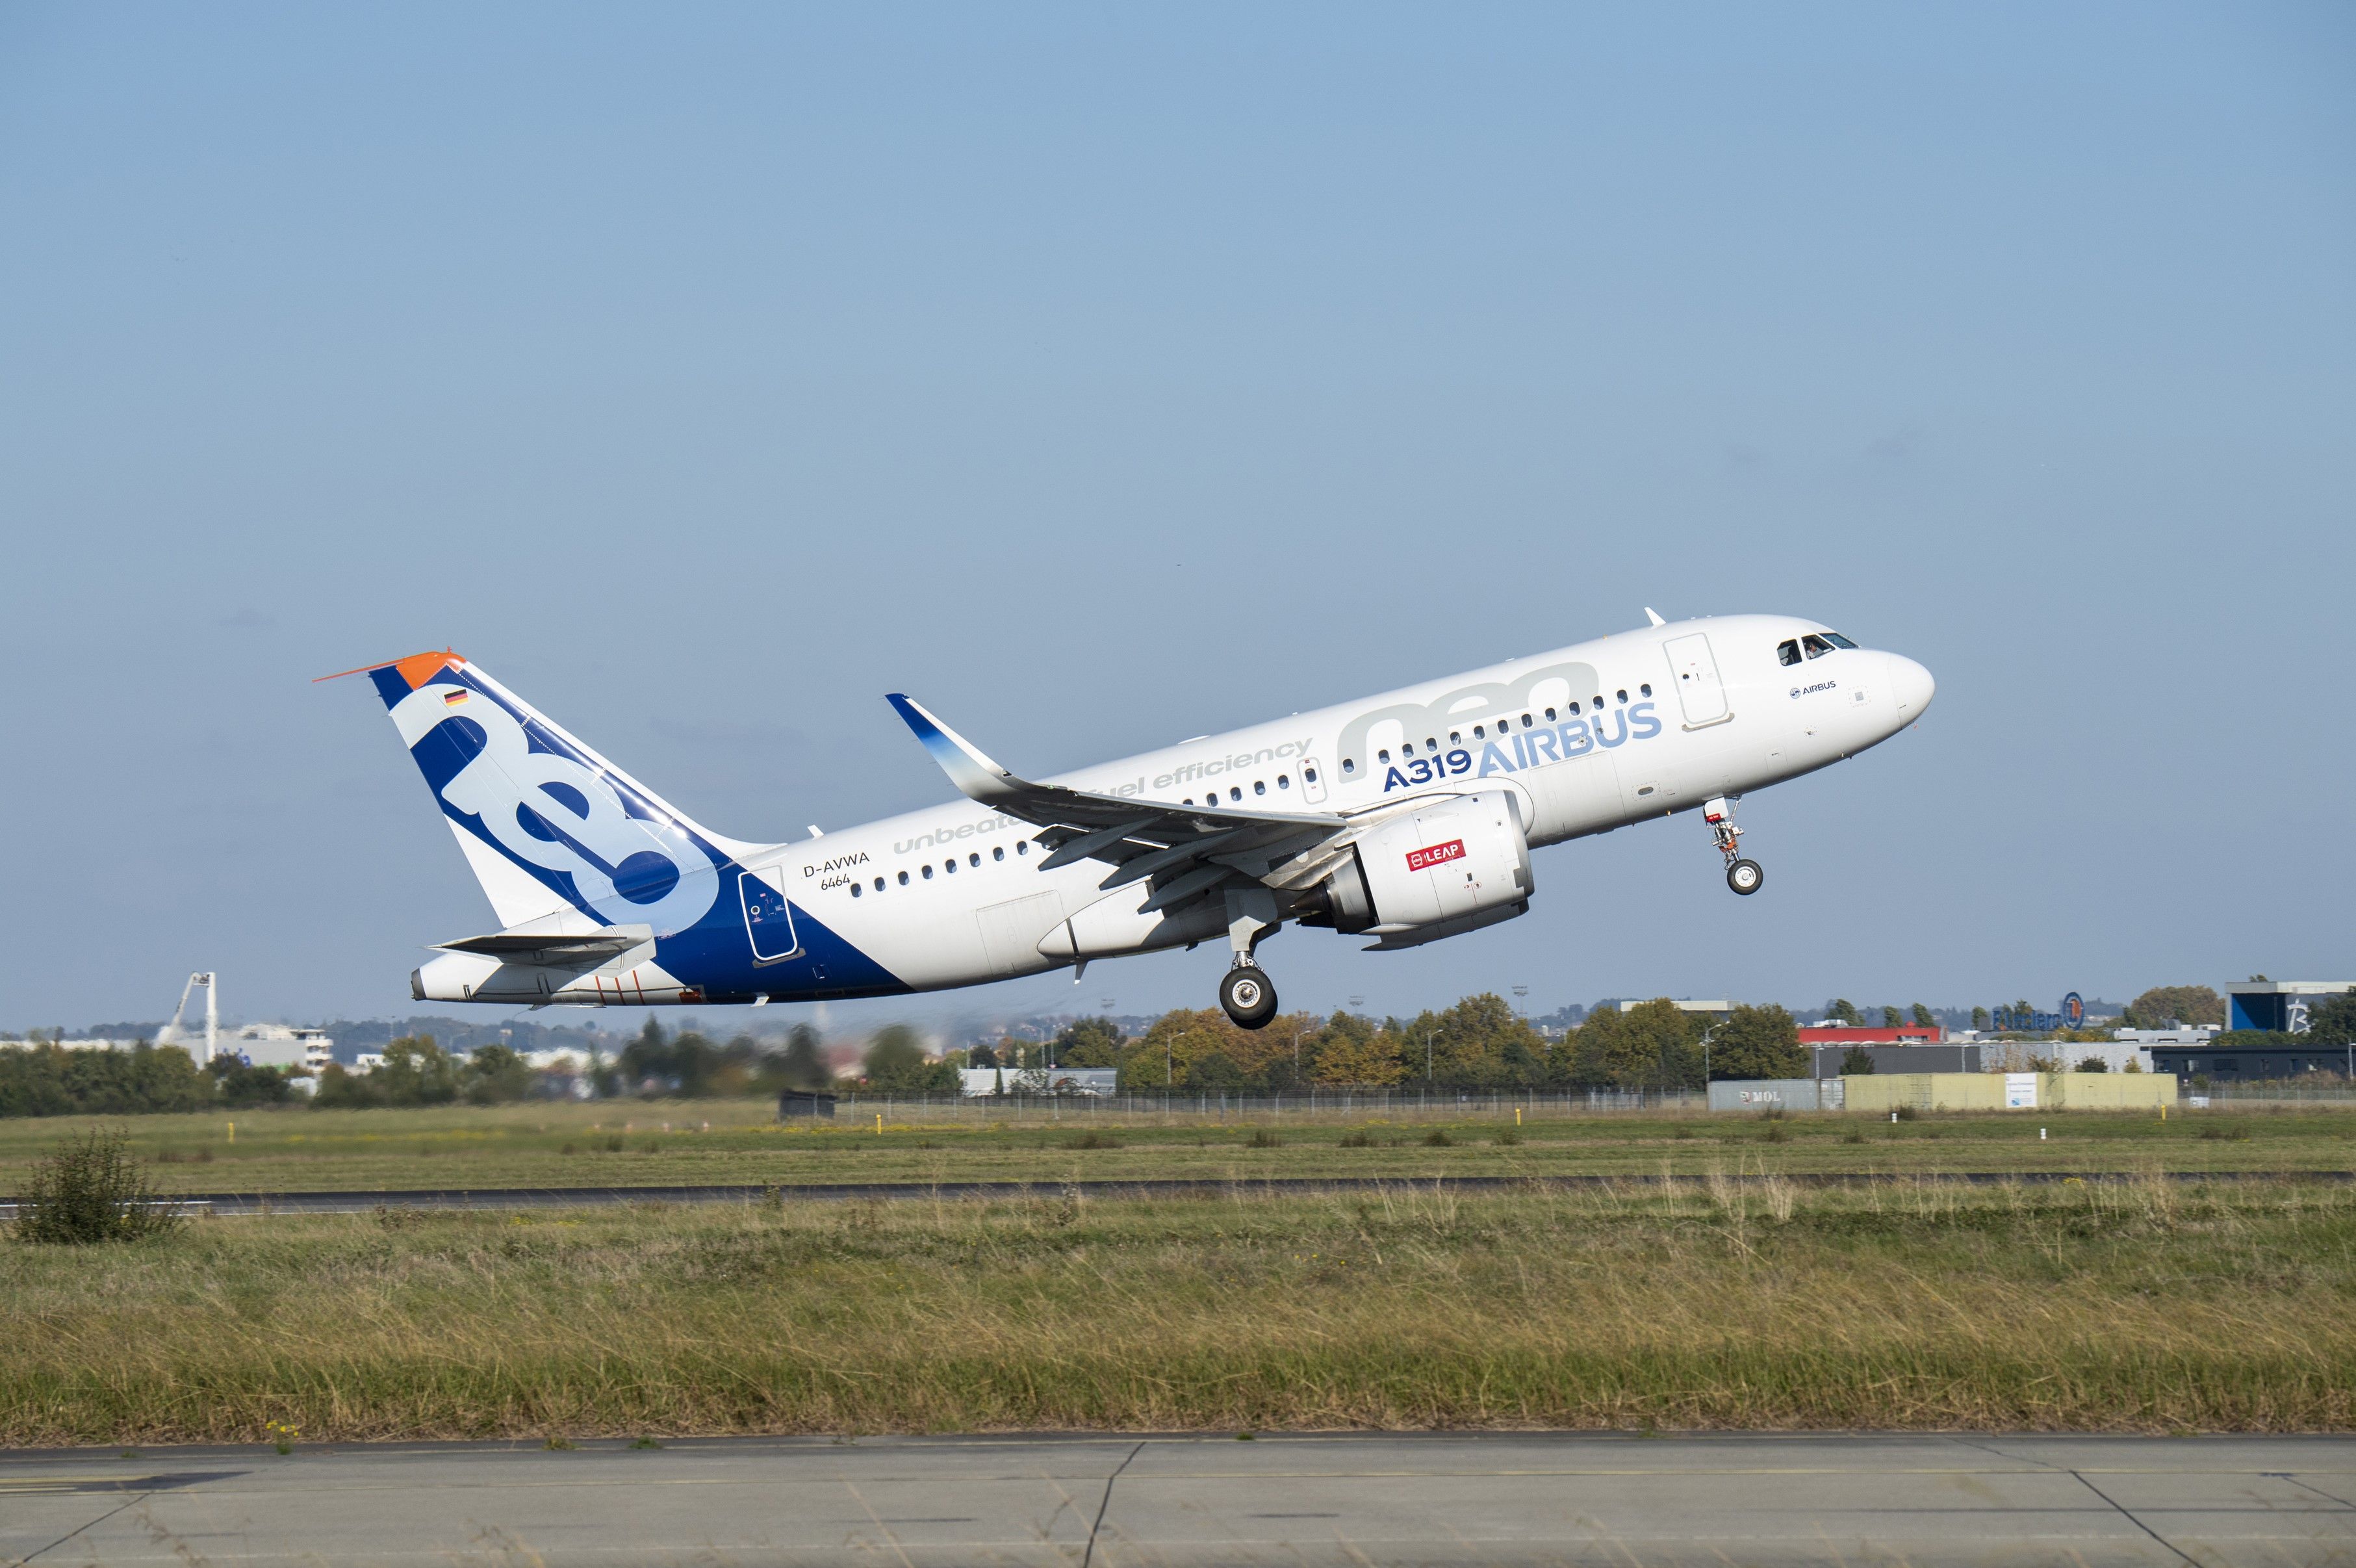 Airbus A319neo Taking Off